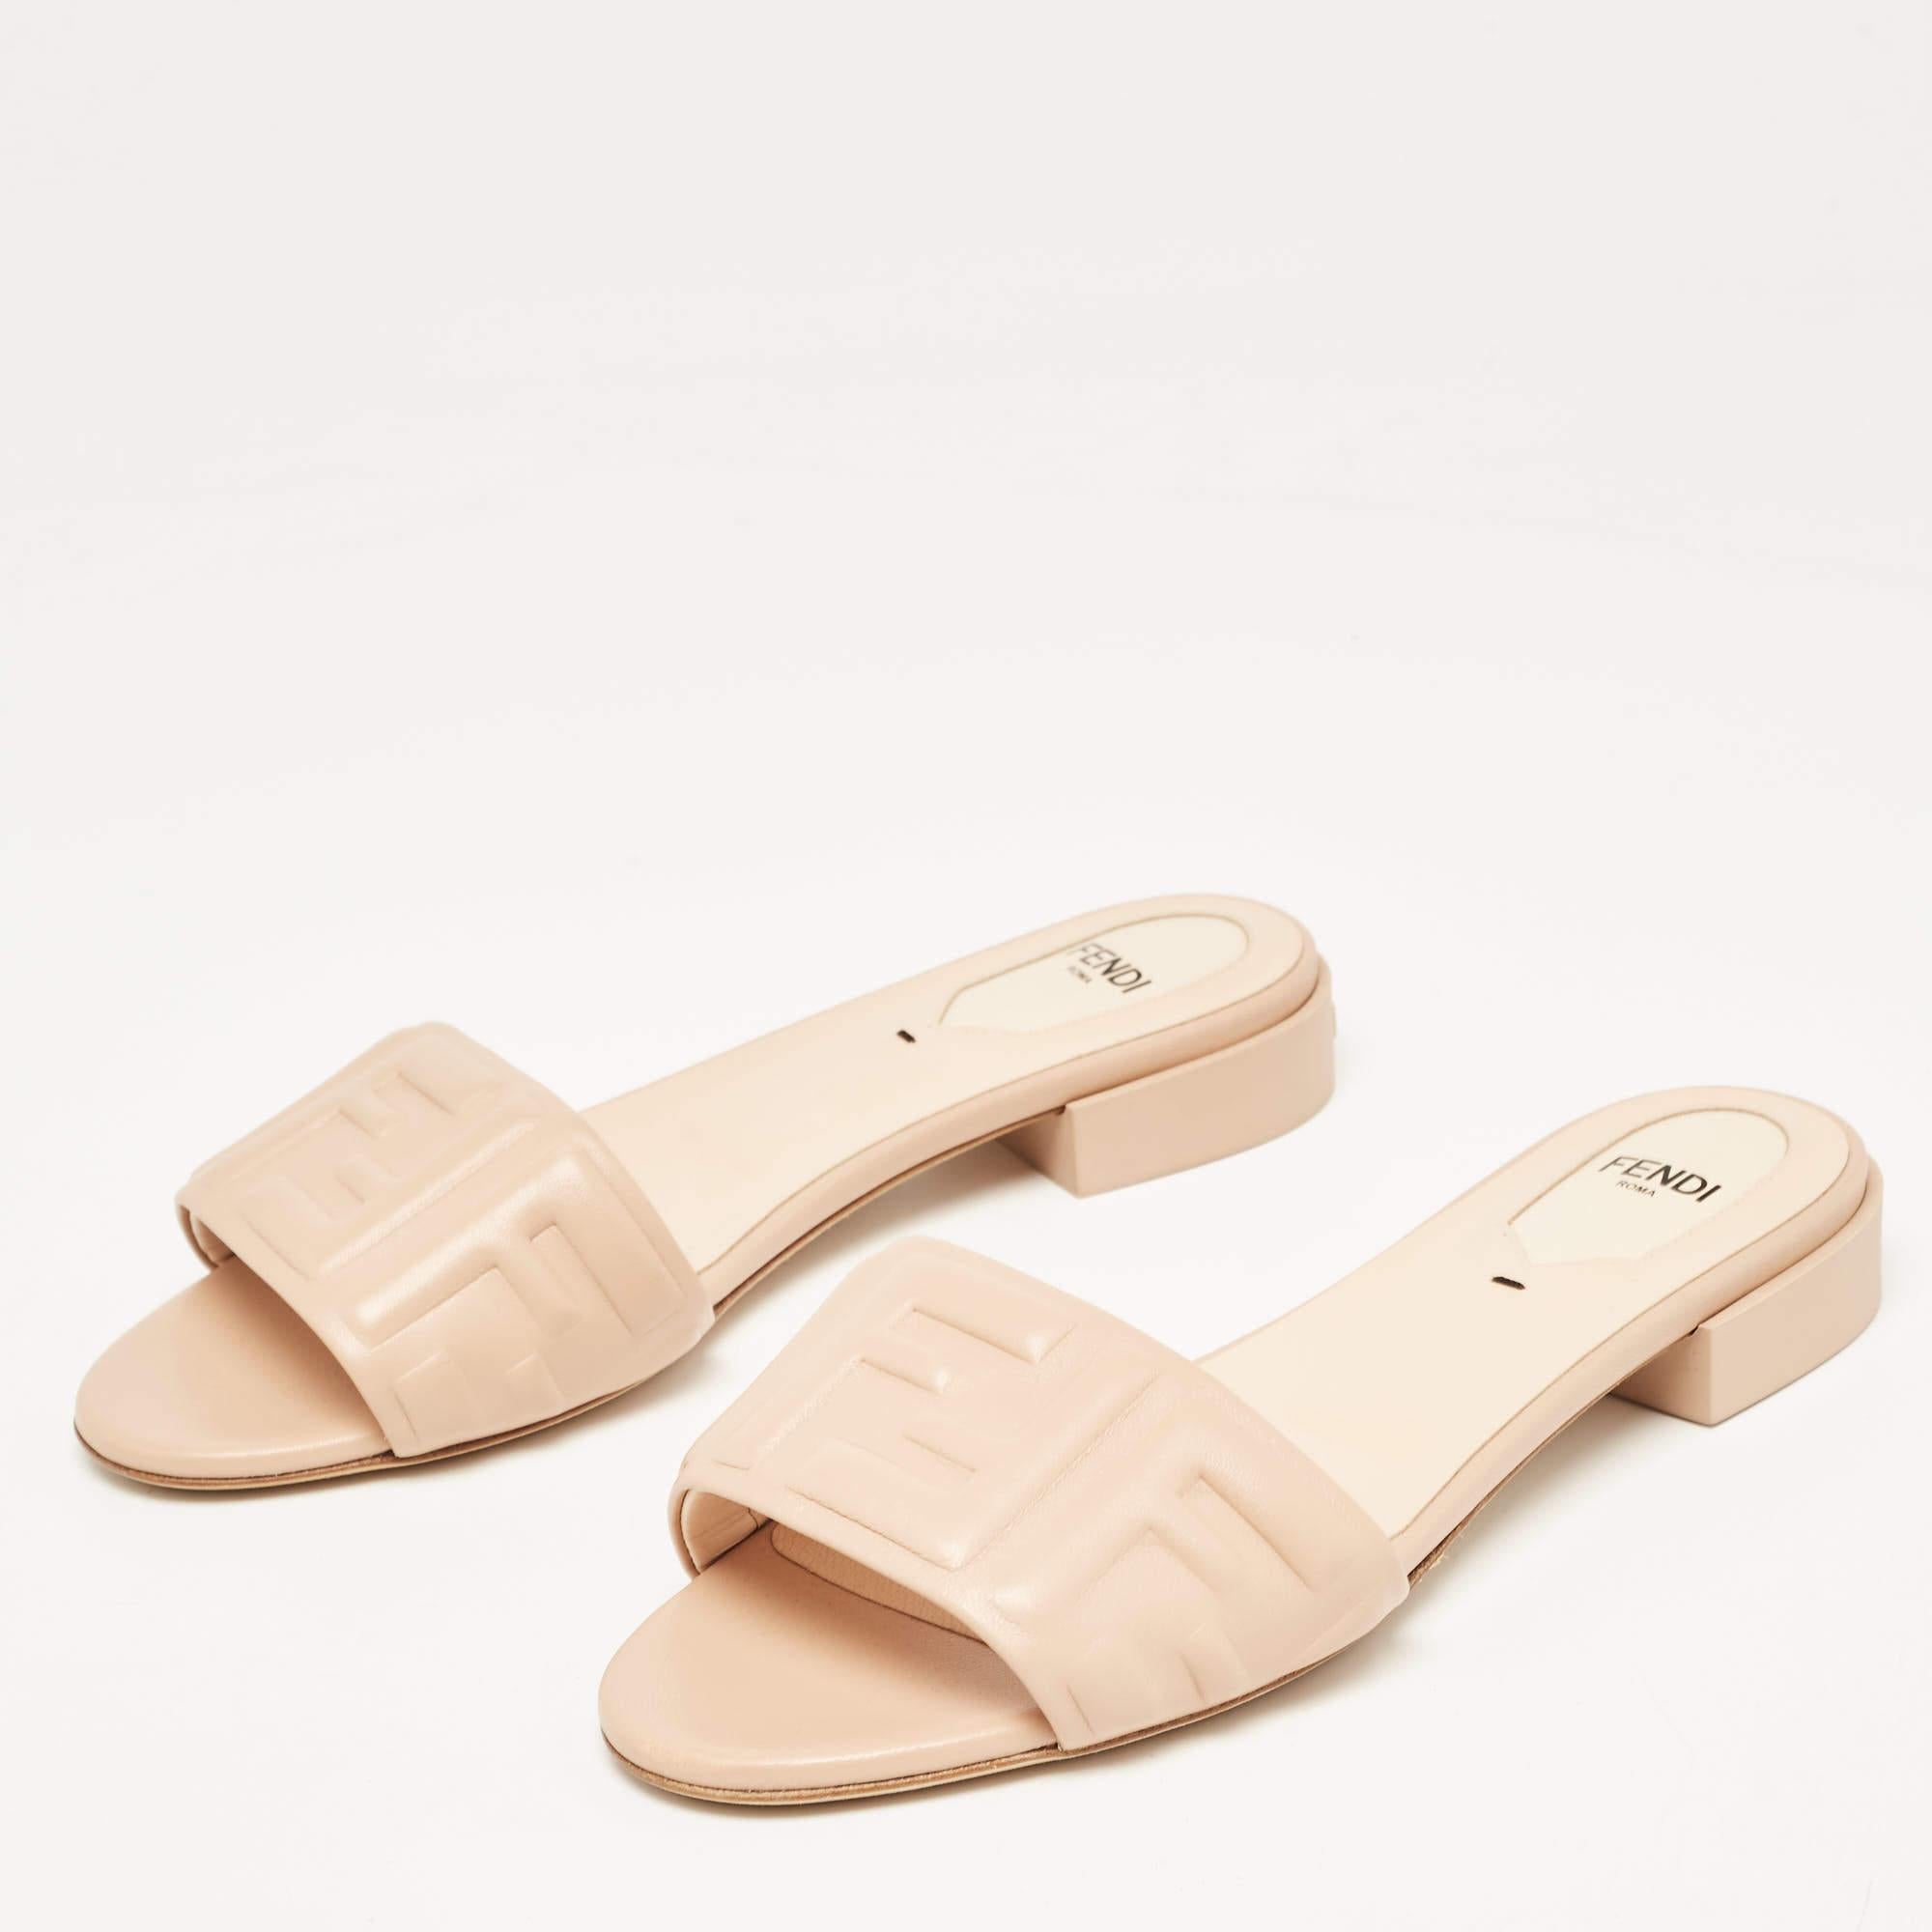 Complement your well-put-together outfit with these authentic Fendi slides. Timeless and classy, they have an amazing construction for enduring quality and comfortable fit.

